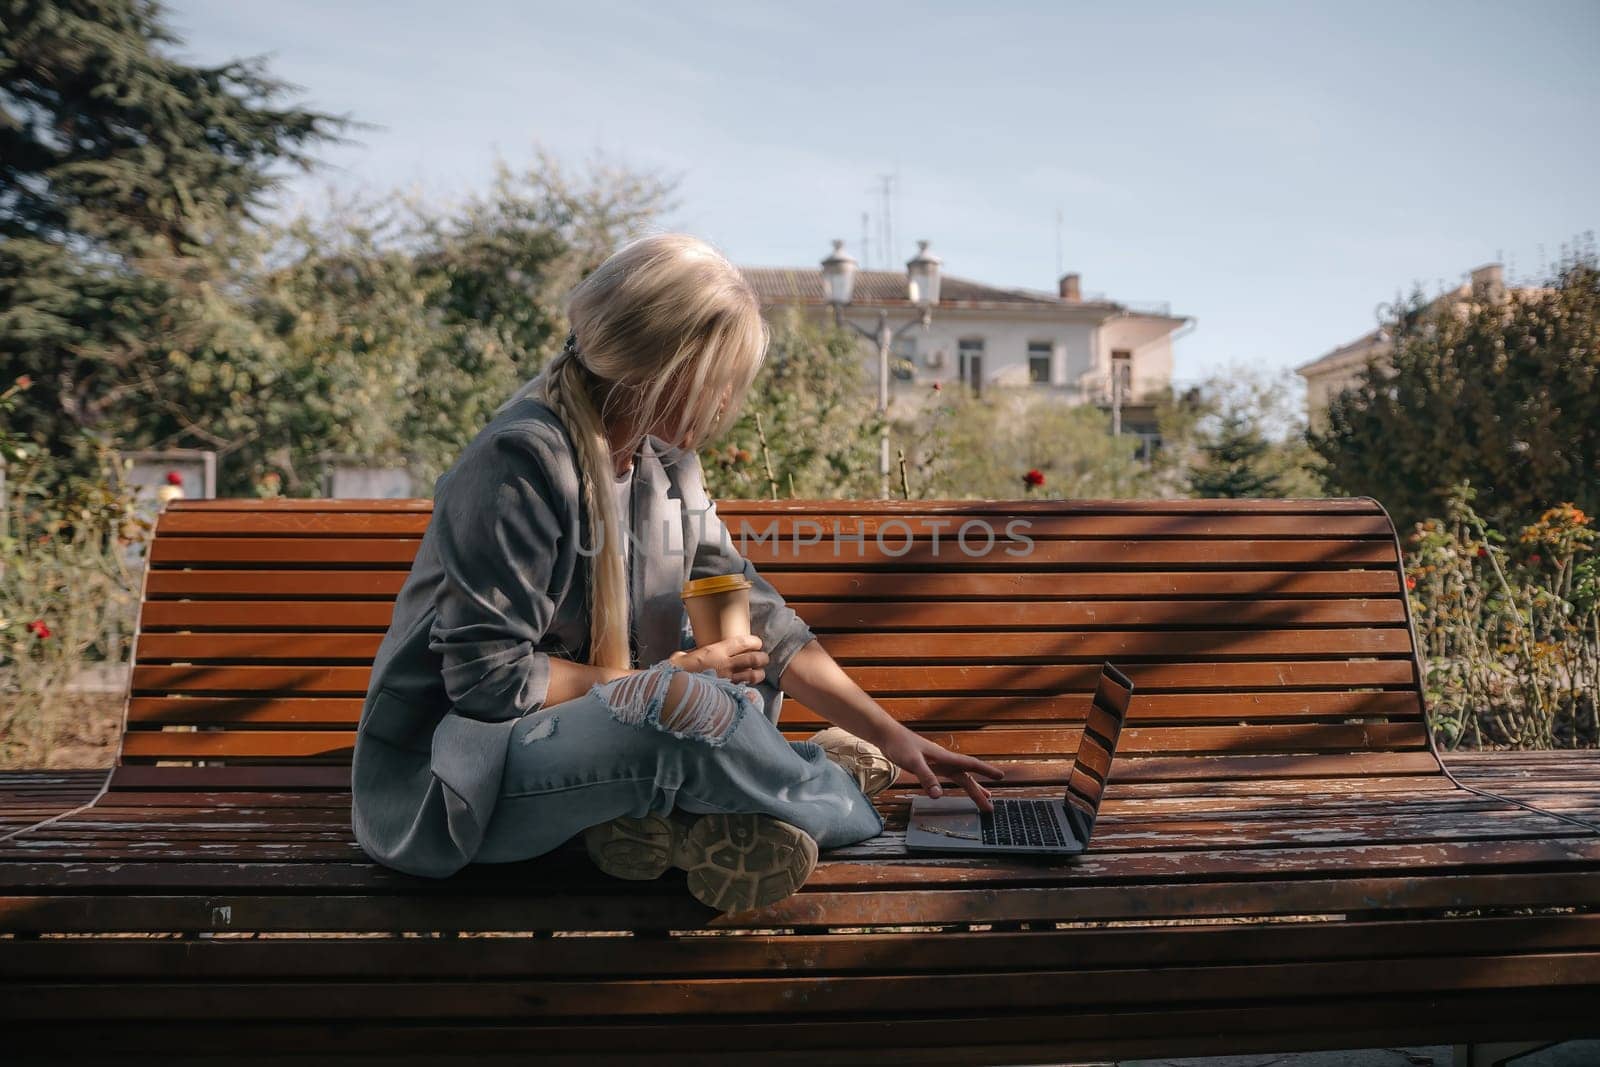 A woman sits on a bench with a laptop open in front of her. She has a cup of coffee in her hand and her jeans are ripped. The scene suggests a relaxed and casual atmosphere